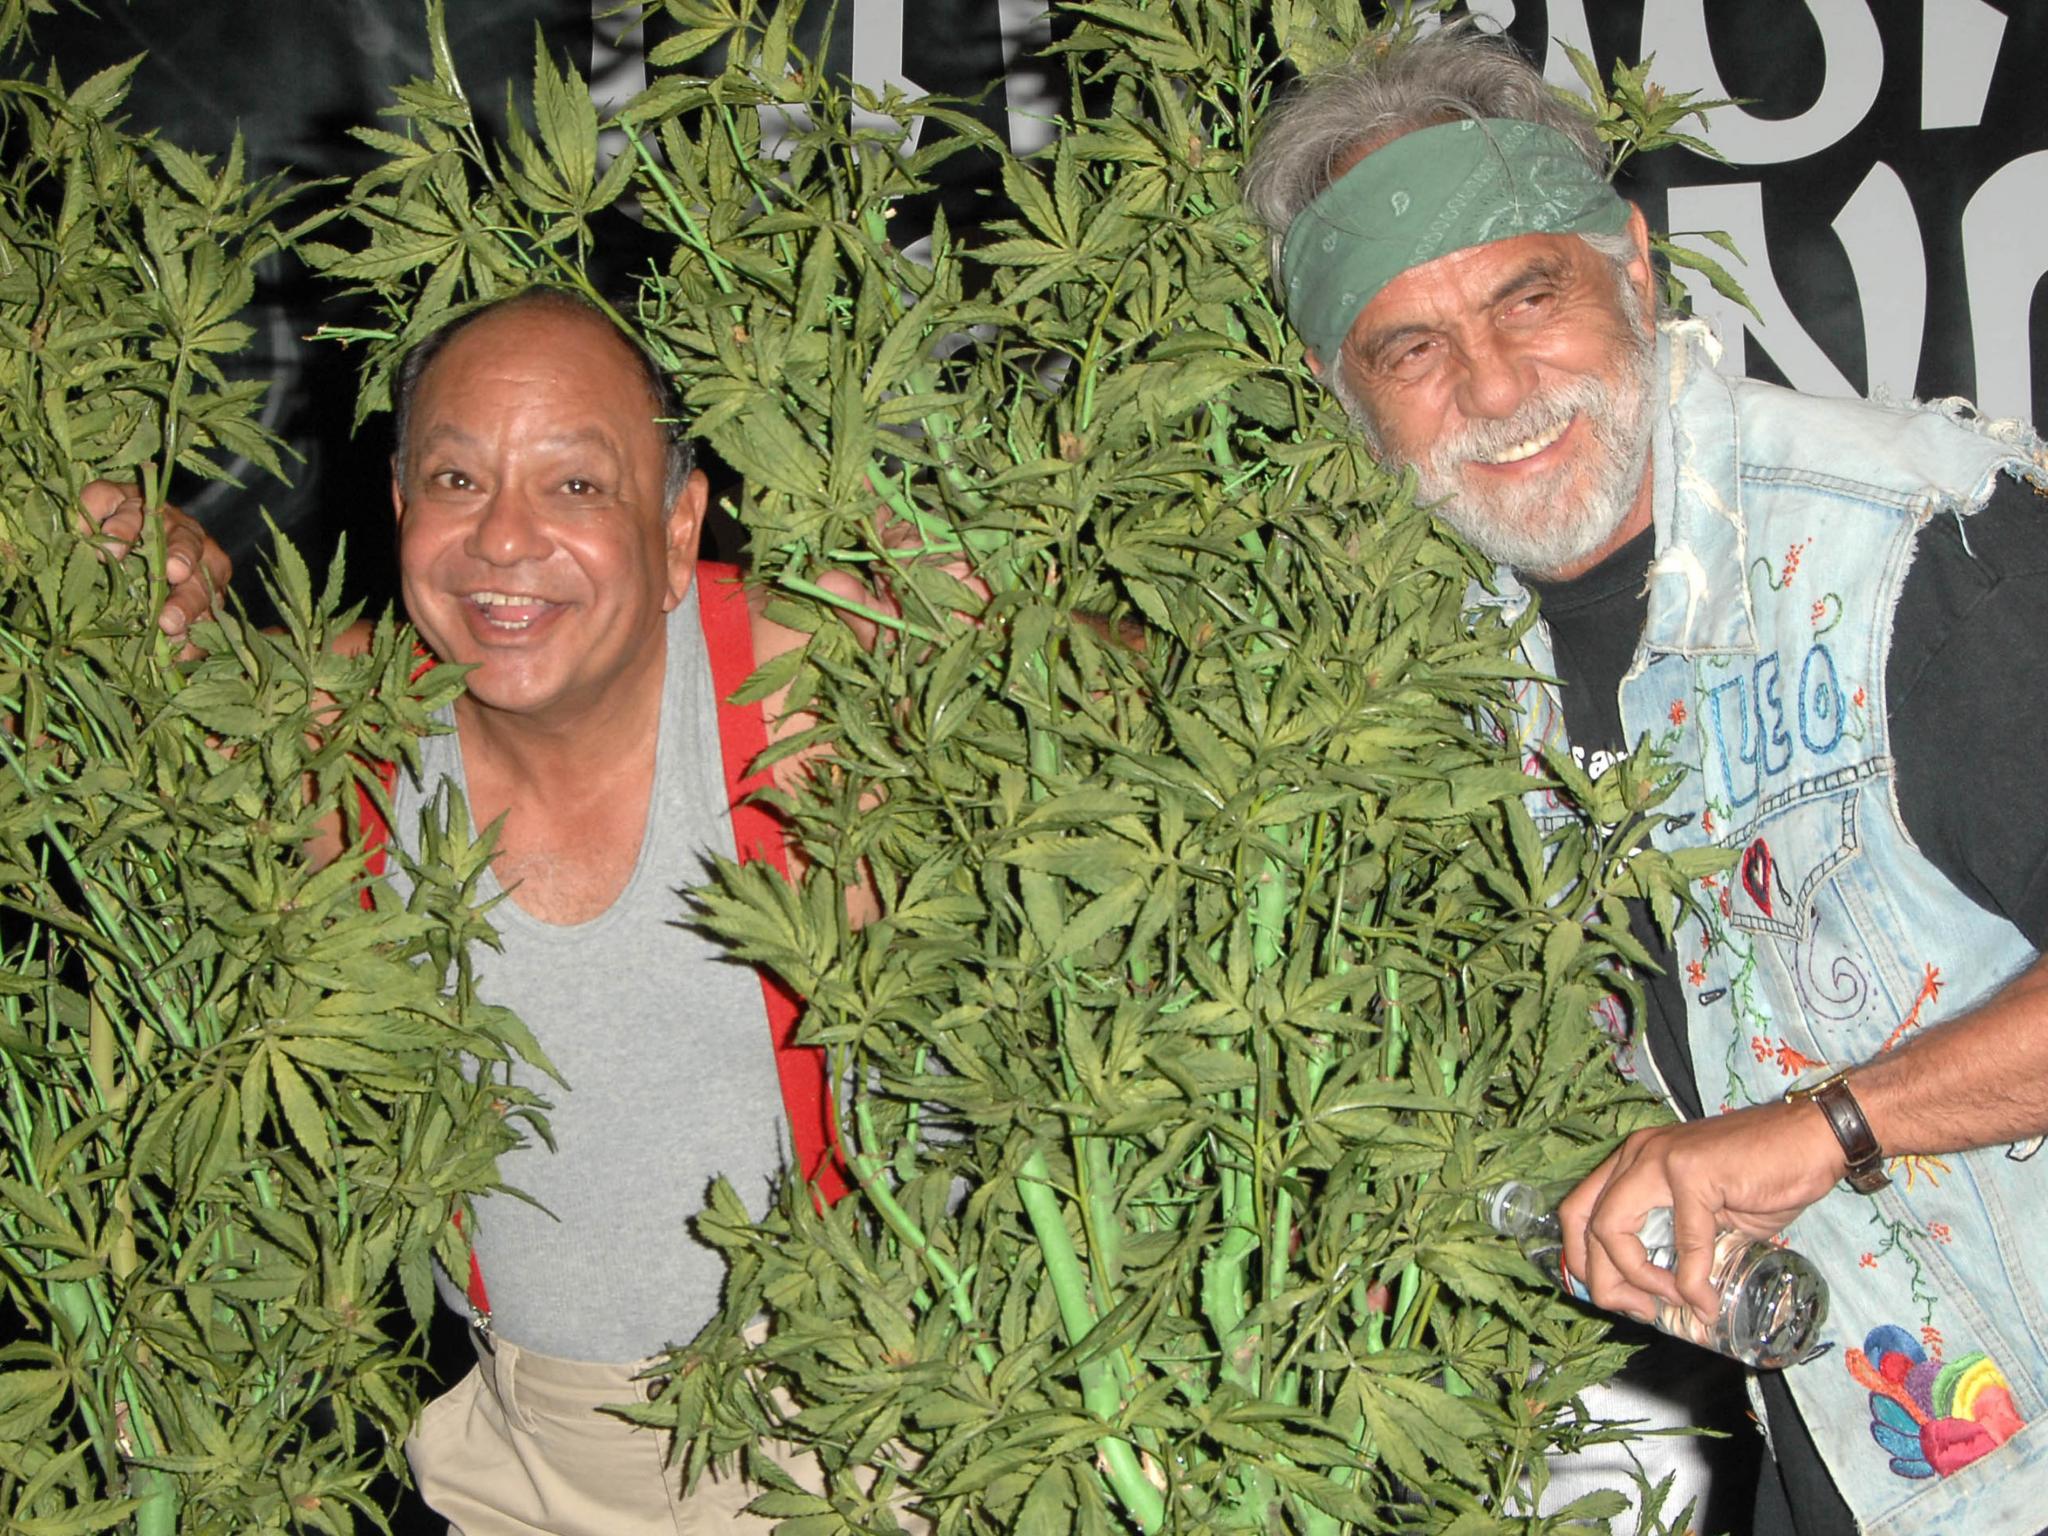  cheech--chong-cannabis-products-in-new-york-terpene-cocktails-and-more-alternatives-to-elevate-dry-january 